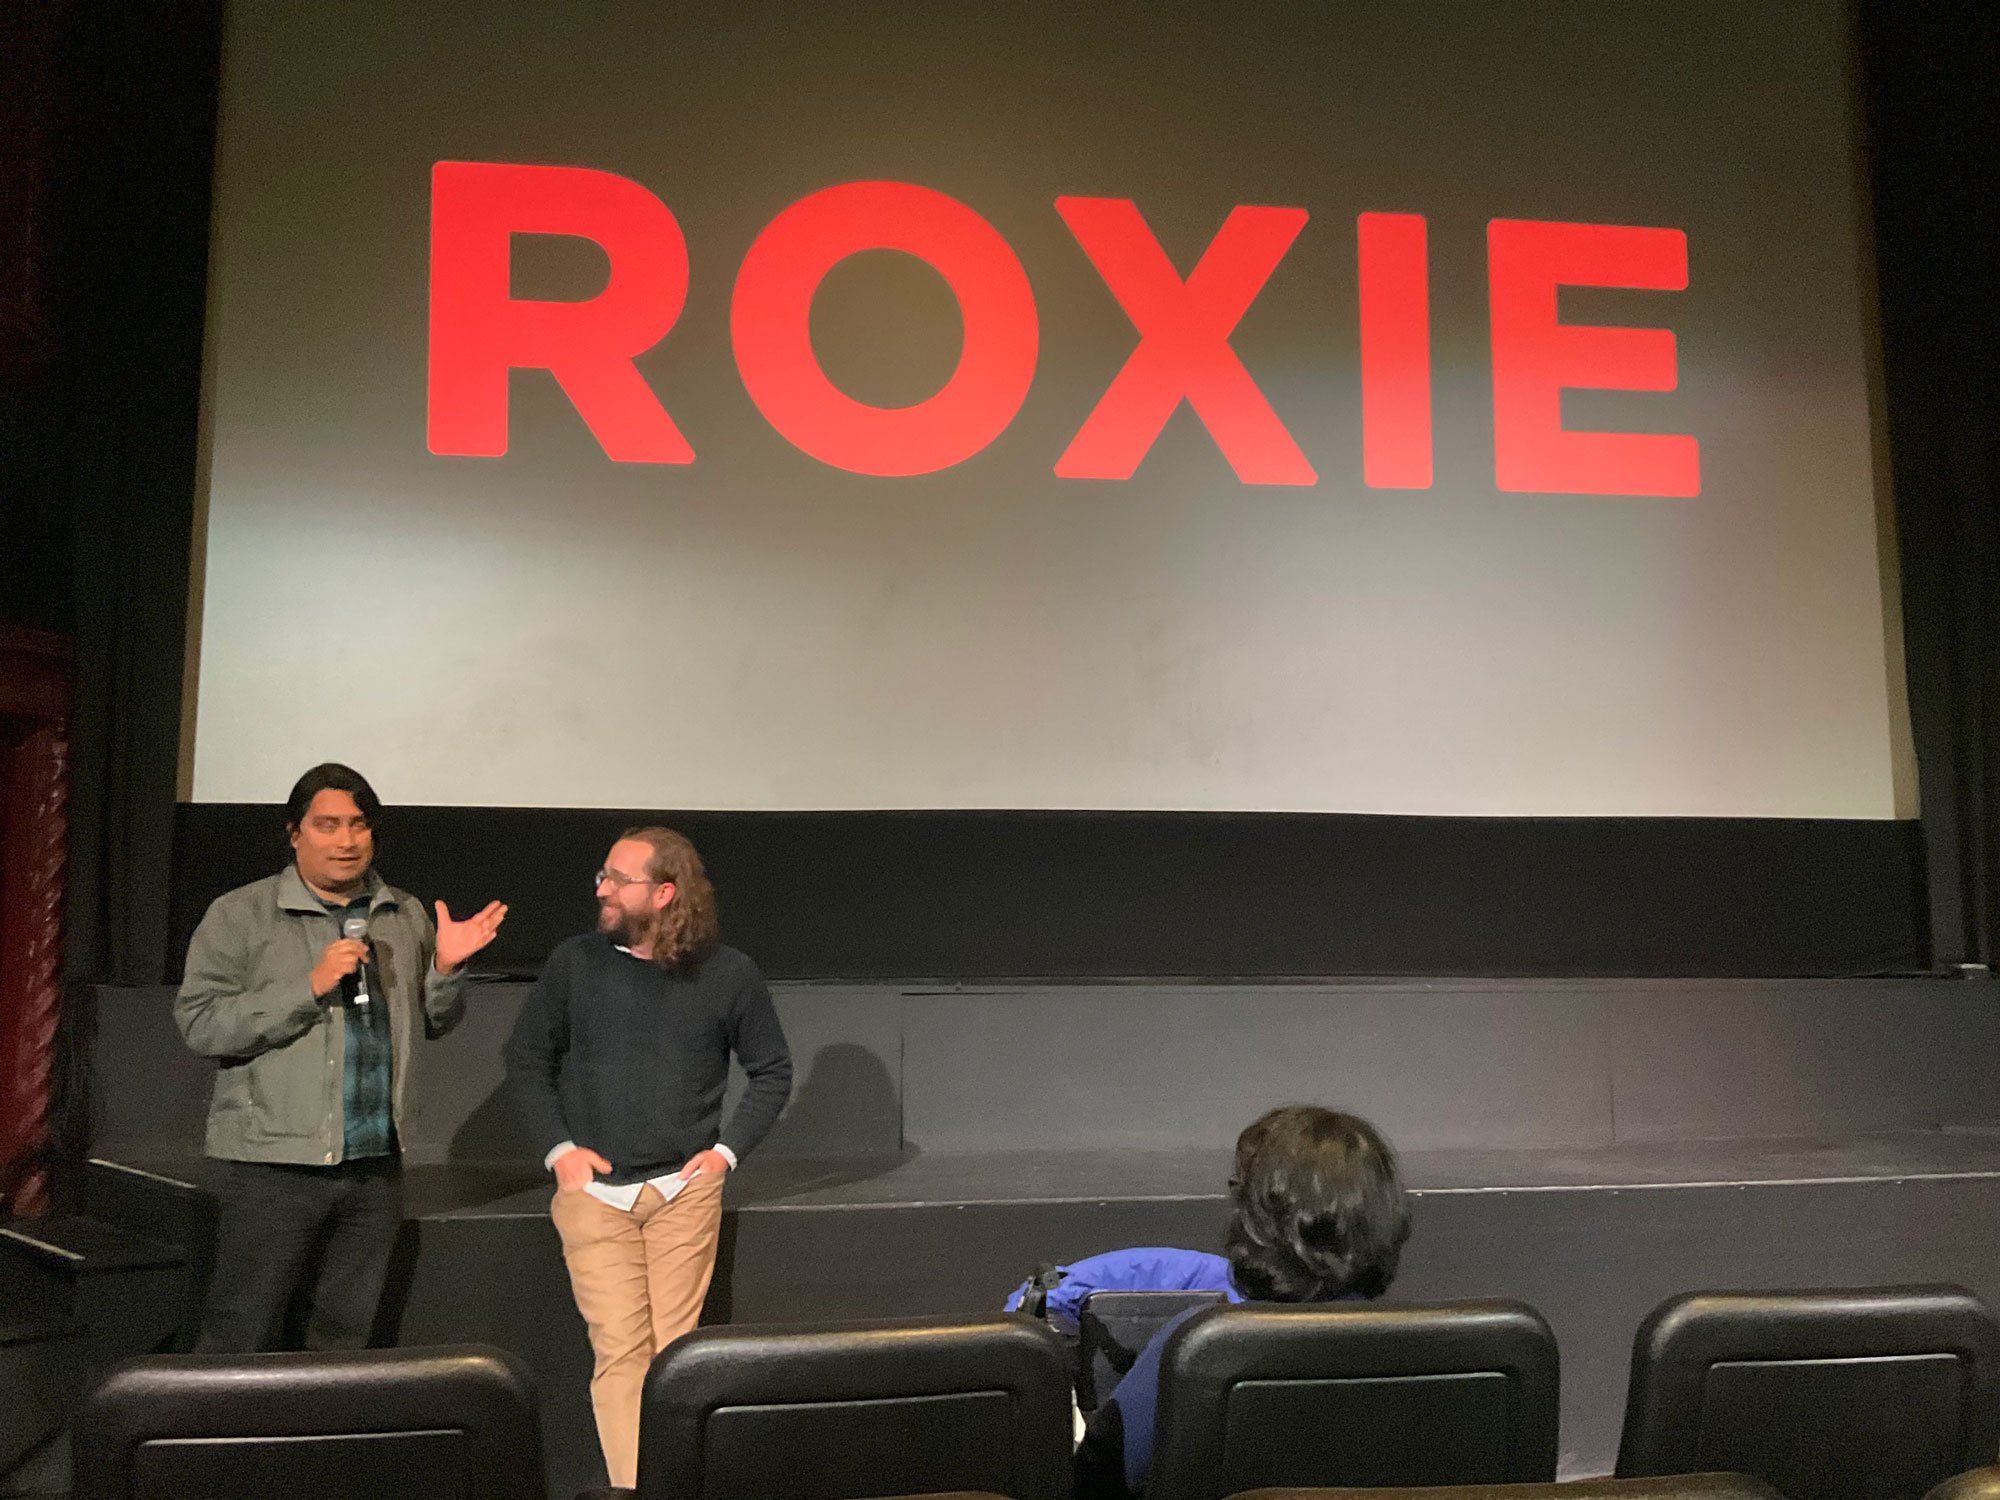 Two people lean against stage facing theater seats with big 'ROXIE' in red on screen